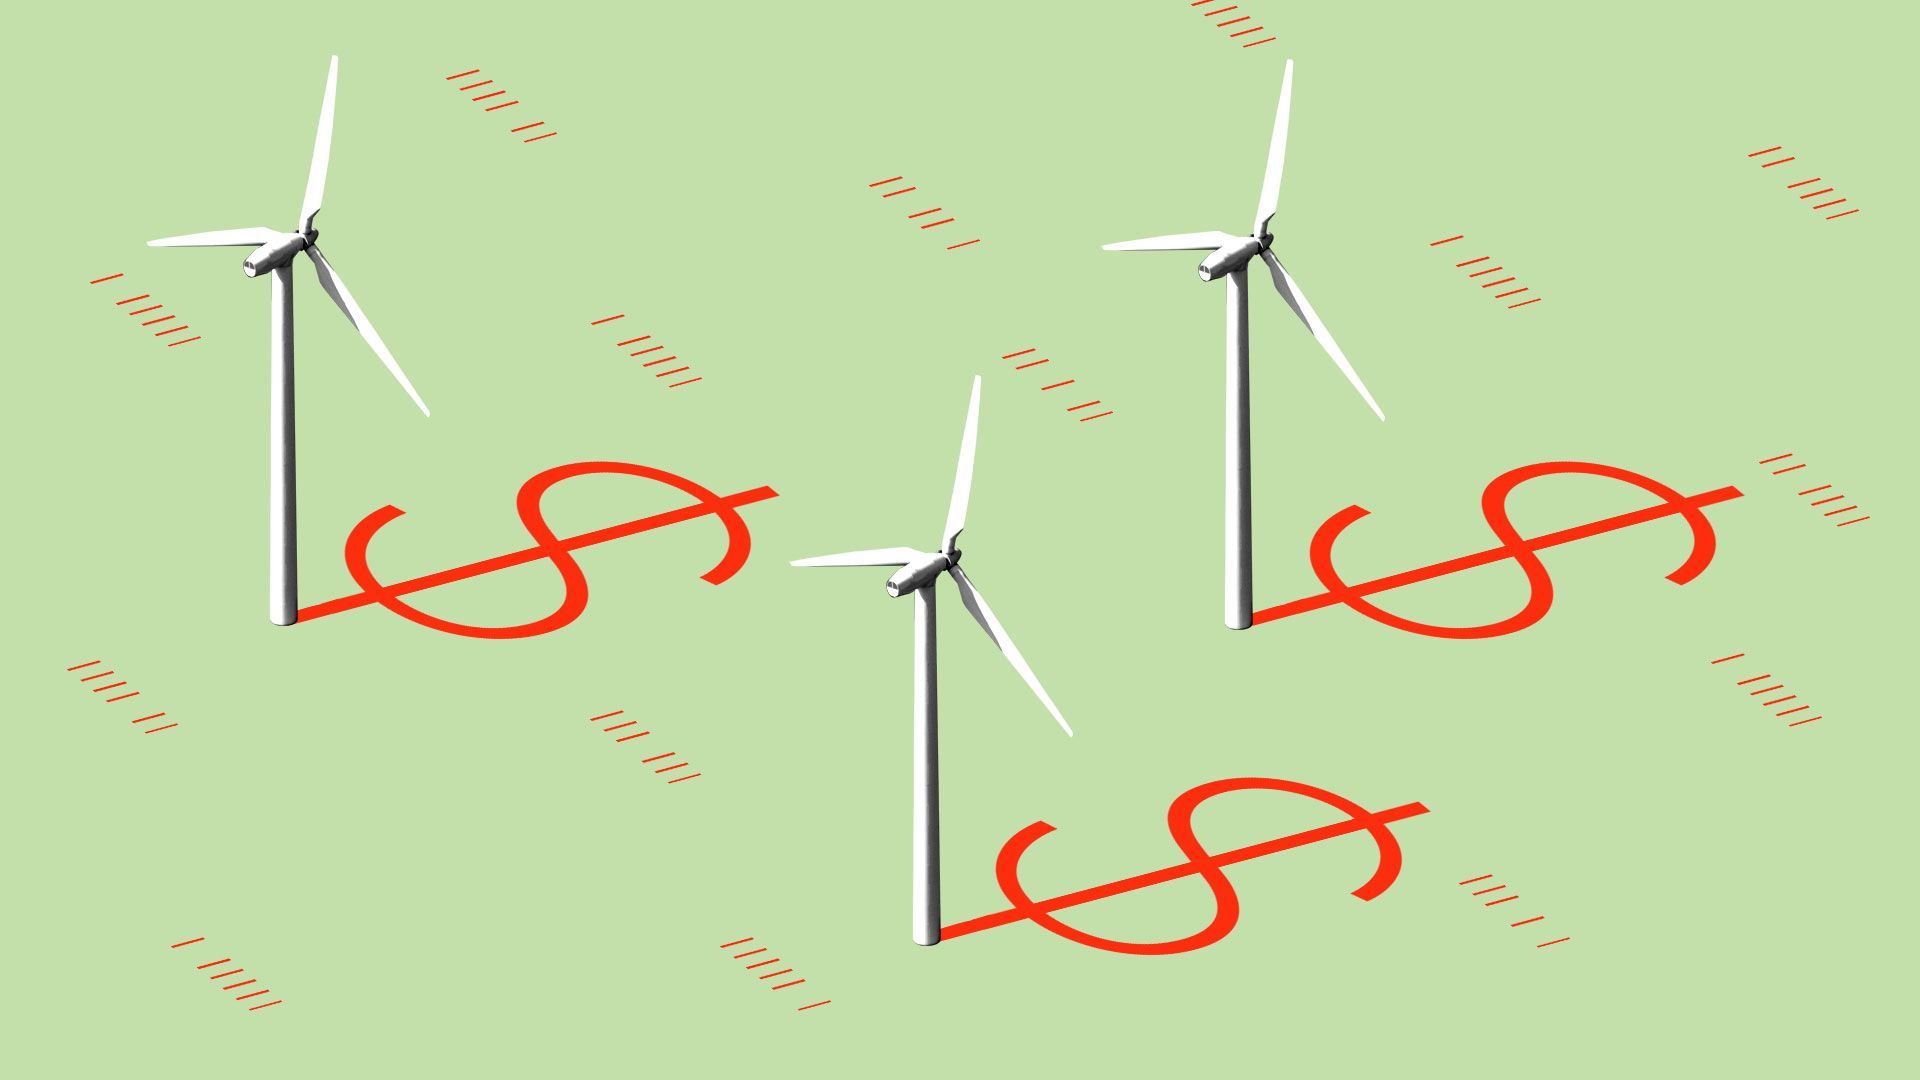 Illustration of wind turbines in a field with red dollar signs on the ground as shadows.